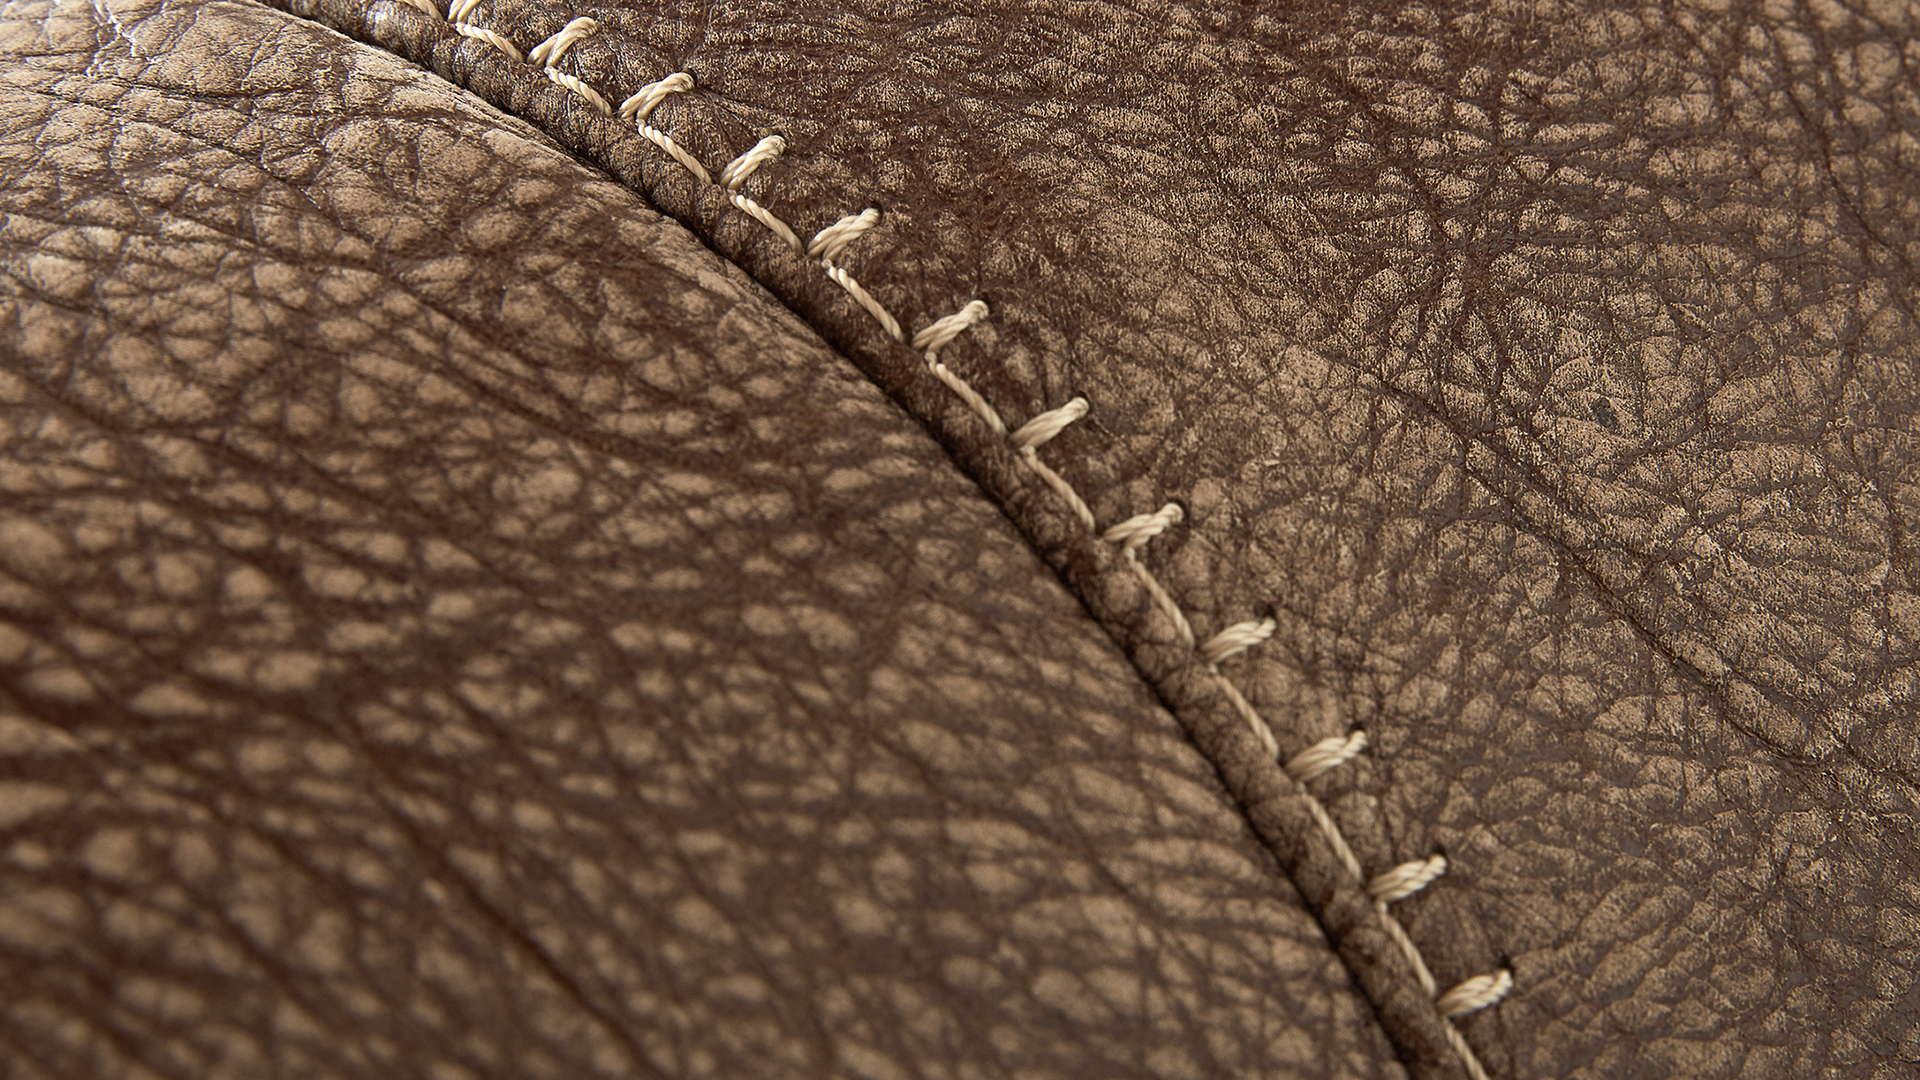 Little Things – How Natural Leather Makes Life Better